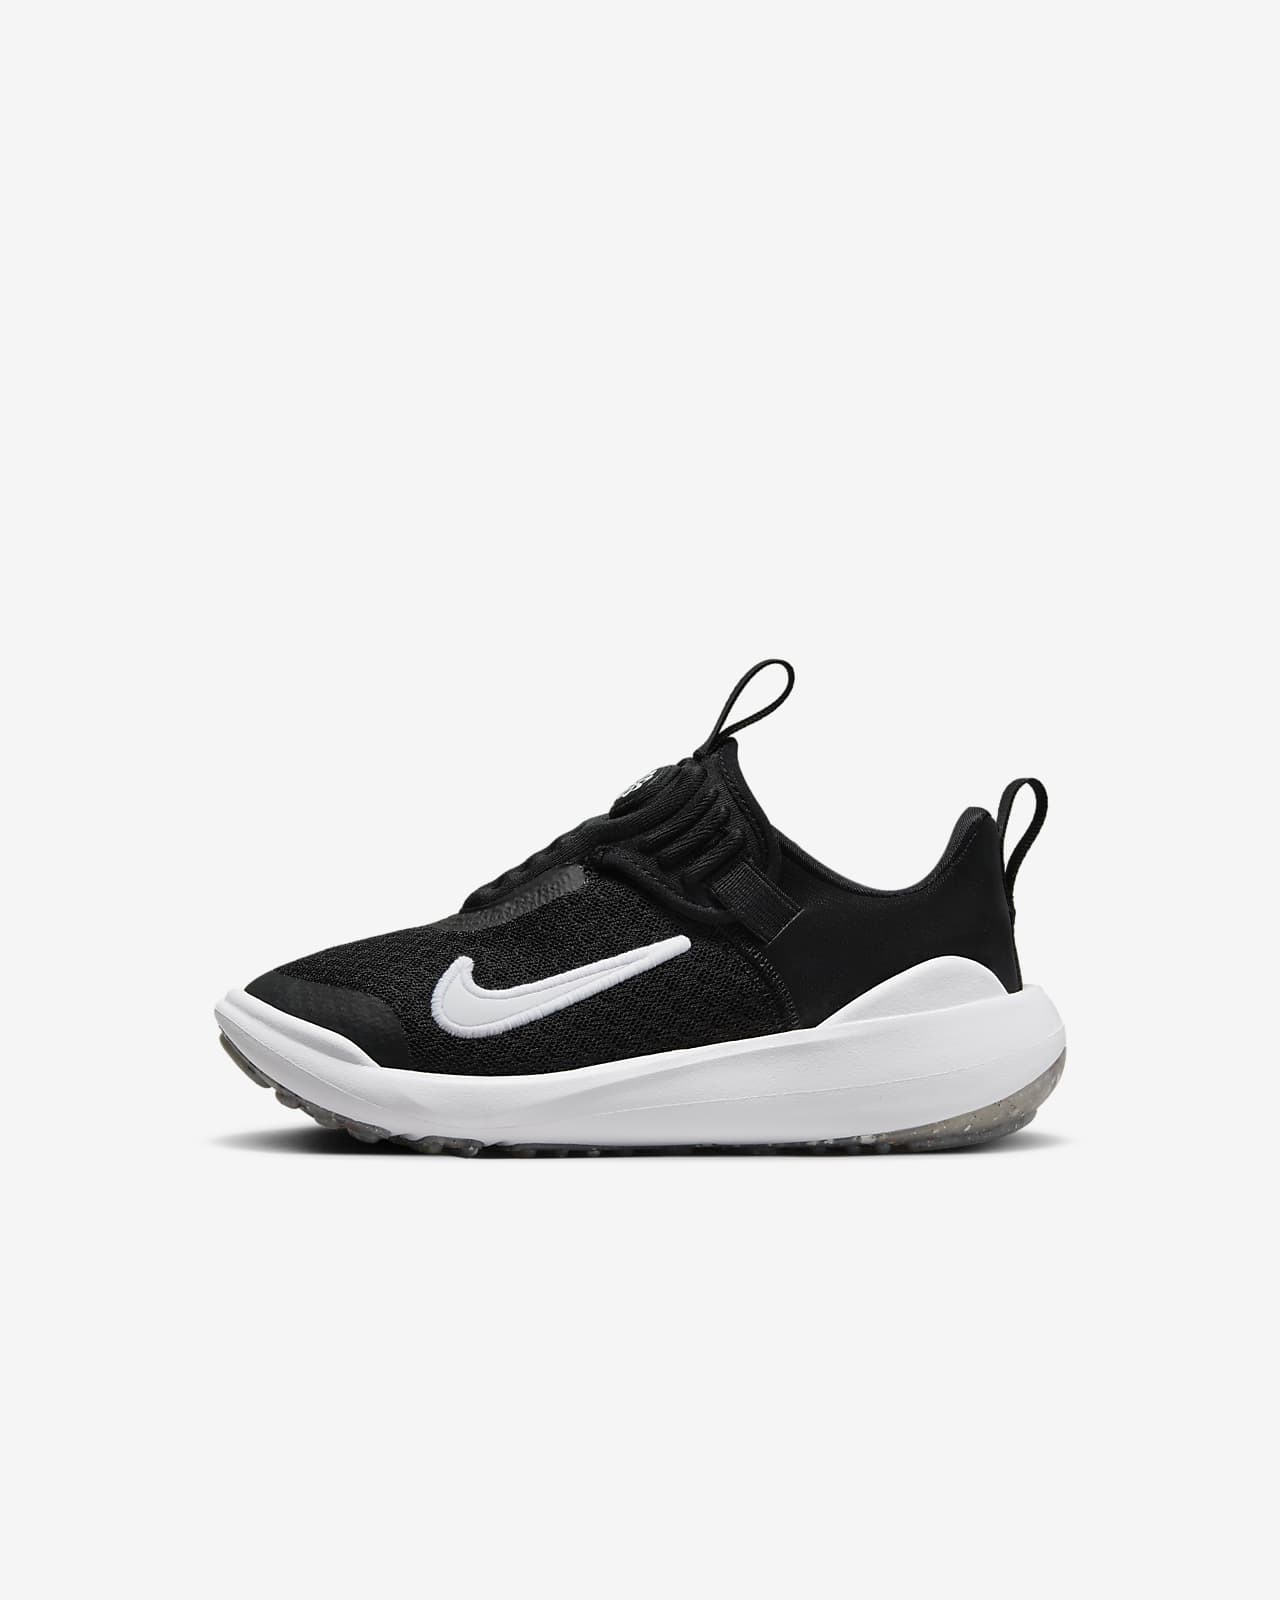 Nike E-Series 1.0 Younger Kids' Shoes